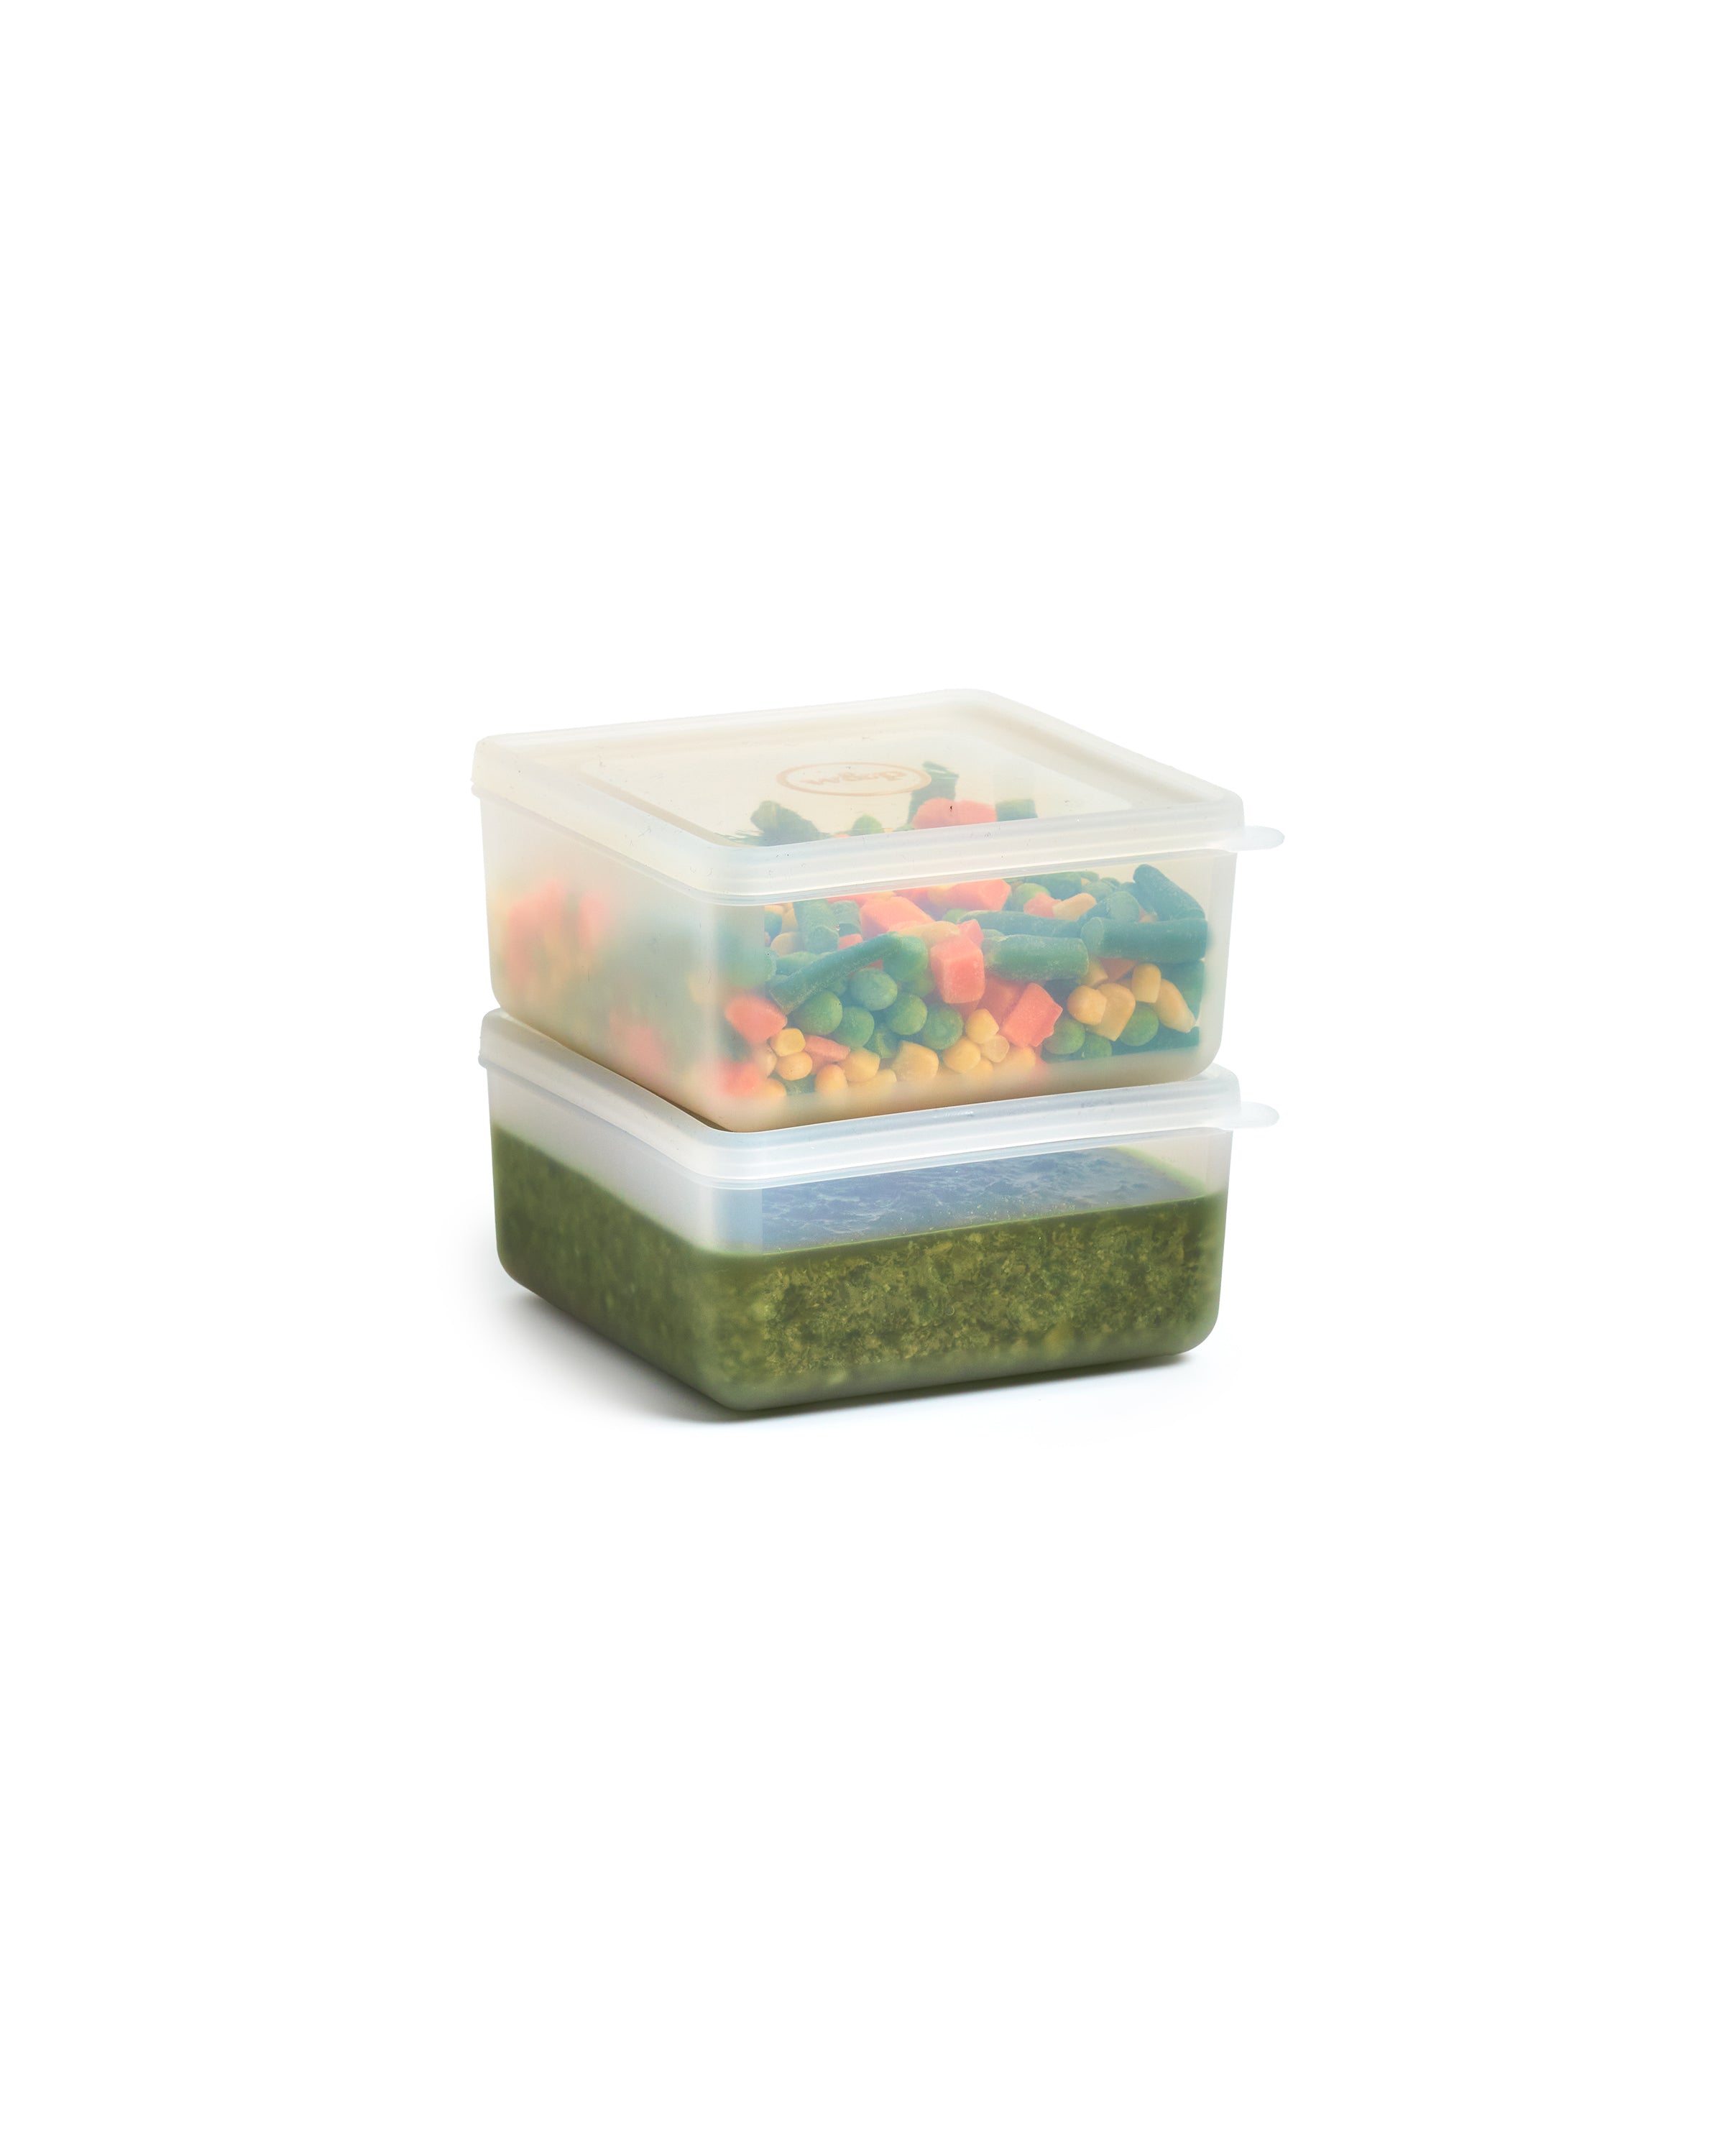 Small - Set of 2 | Small Freezer Cubes come as a set of 2